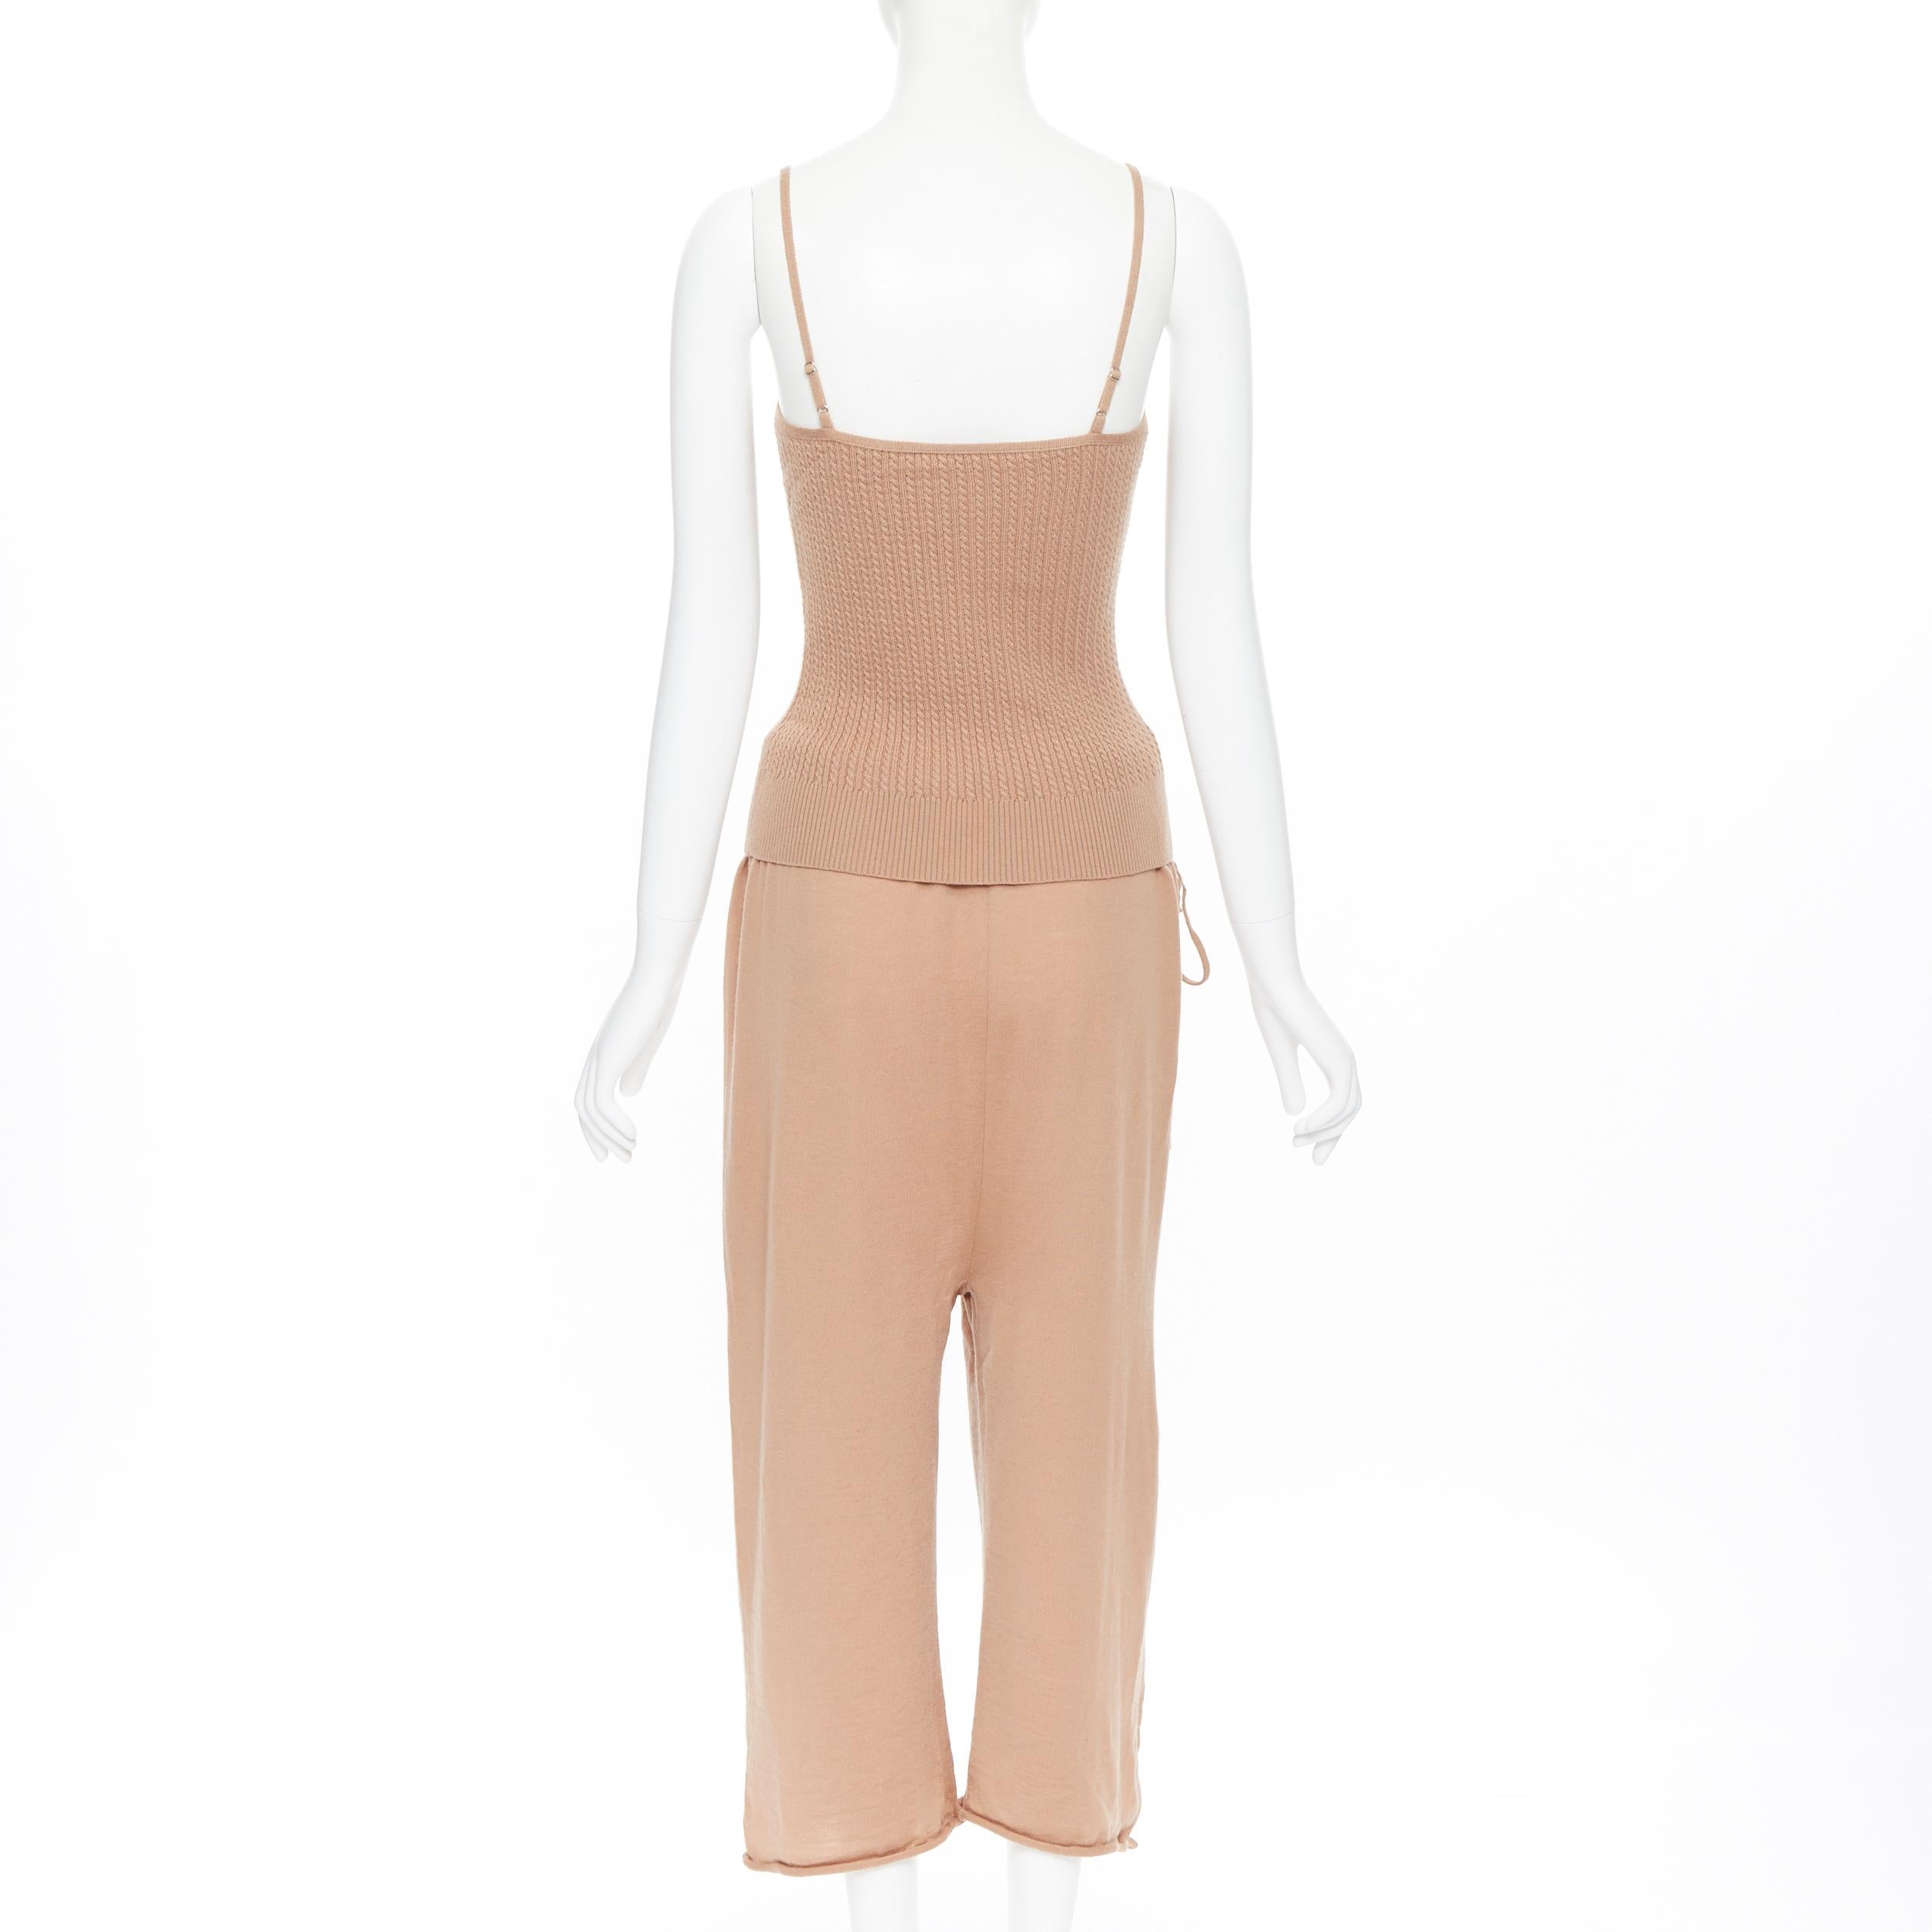 PORTS 1961 merino wool knitted camisole wrap caridgan trouser travel pouch set 1